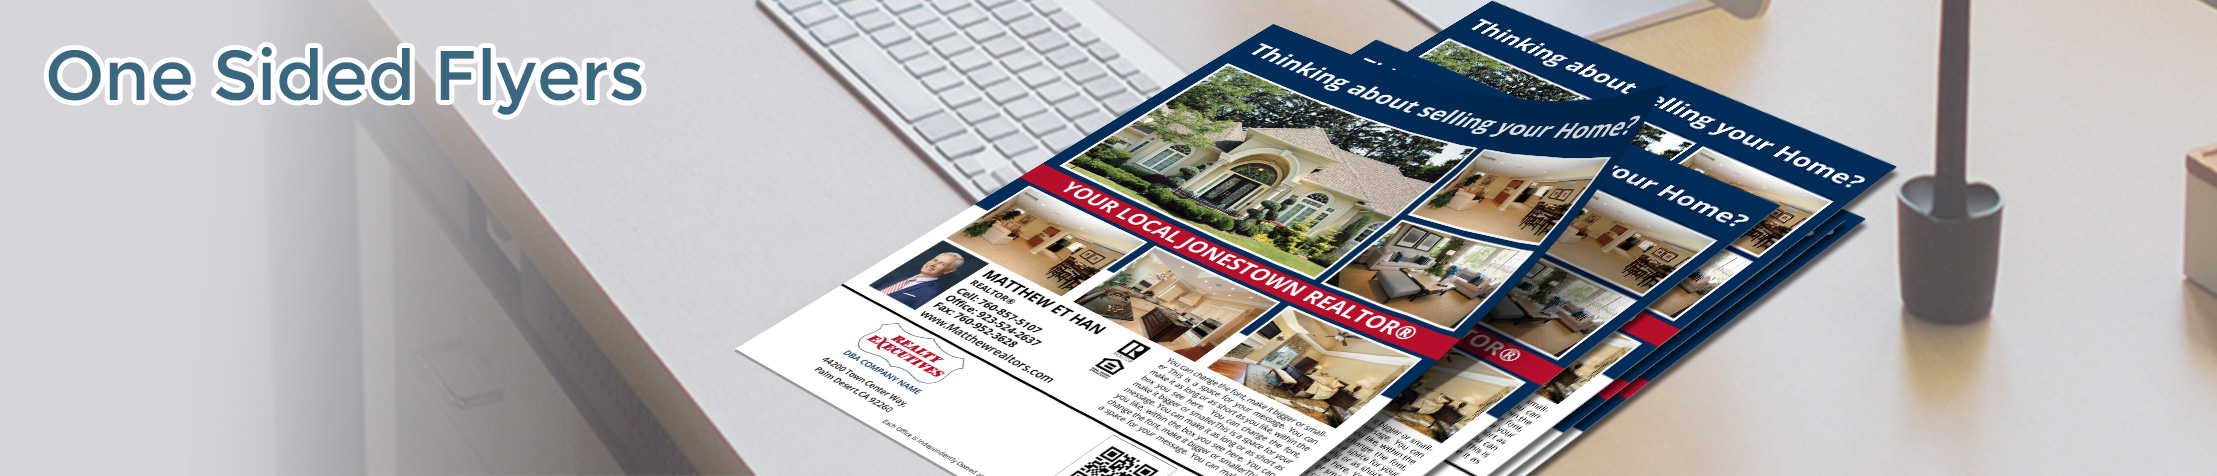 Realty Executives Real Estate Flyers and Brochures - Realty Executives  one-sided flyer templates for open houses and marketing | BestPrintBuy.com